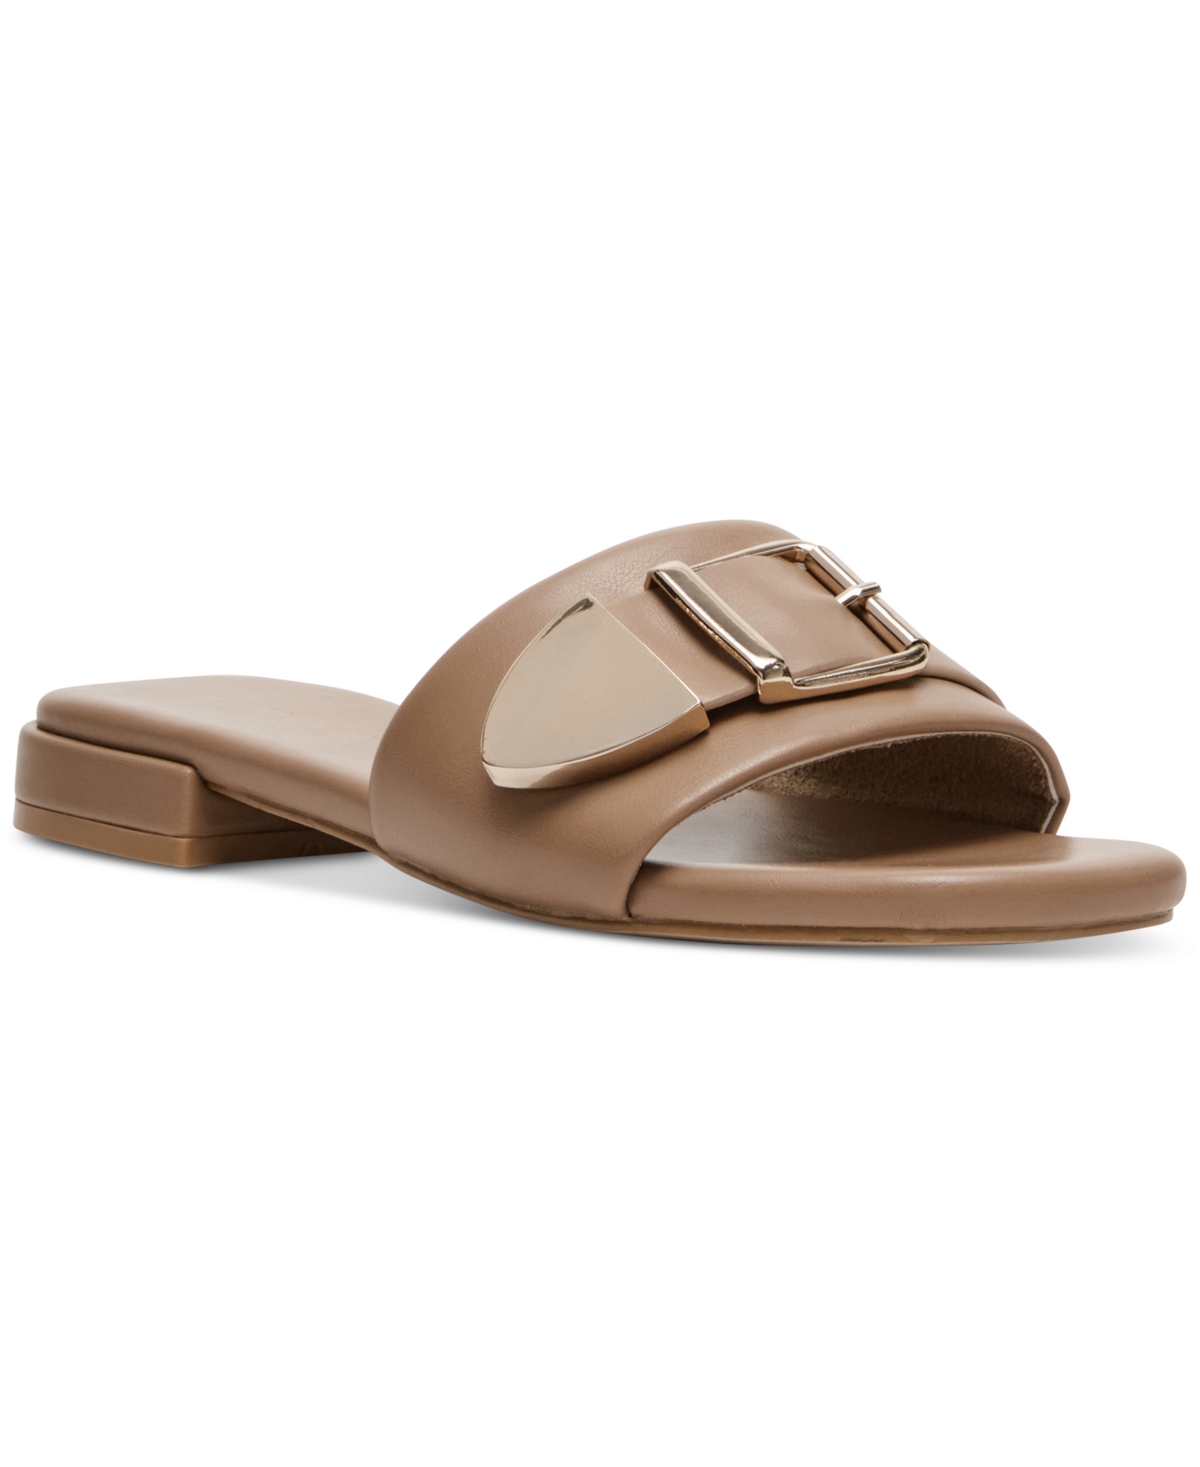 Madden Girl Avaa Buckle Slide Sandals In Cafe